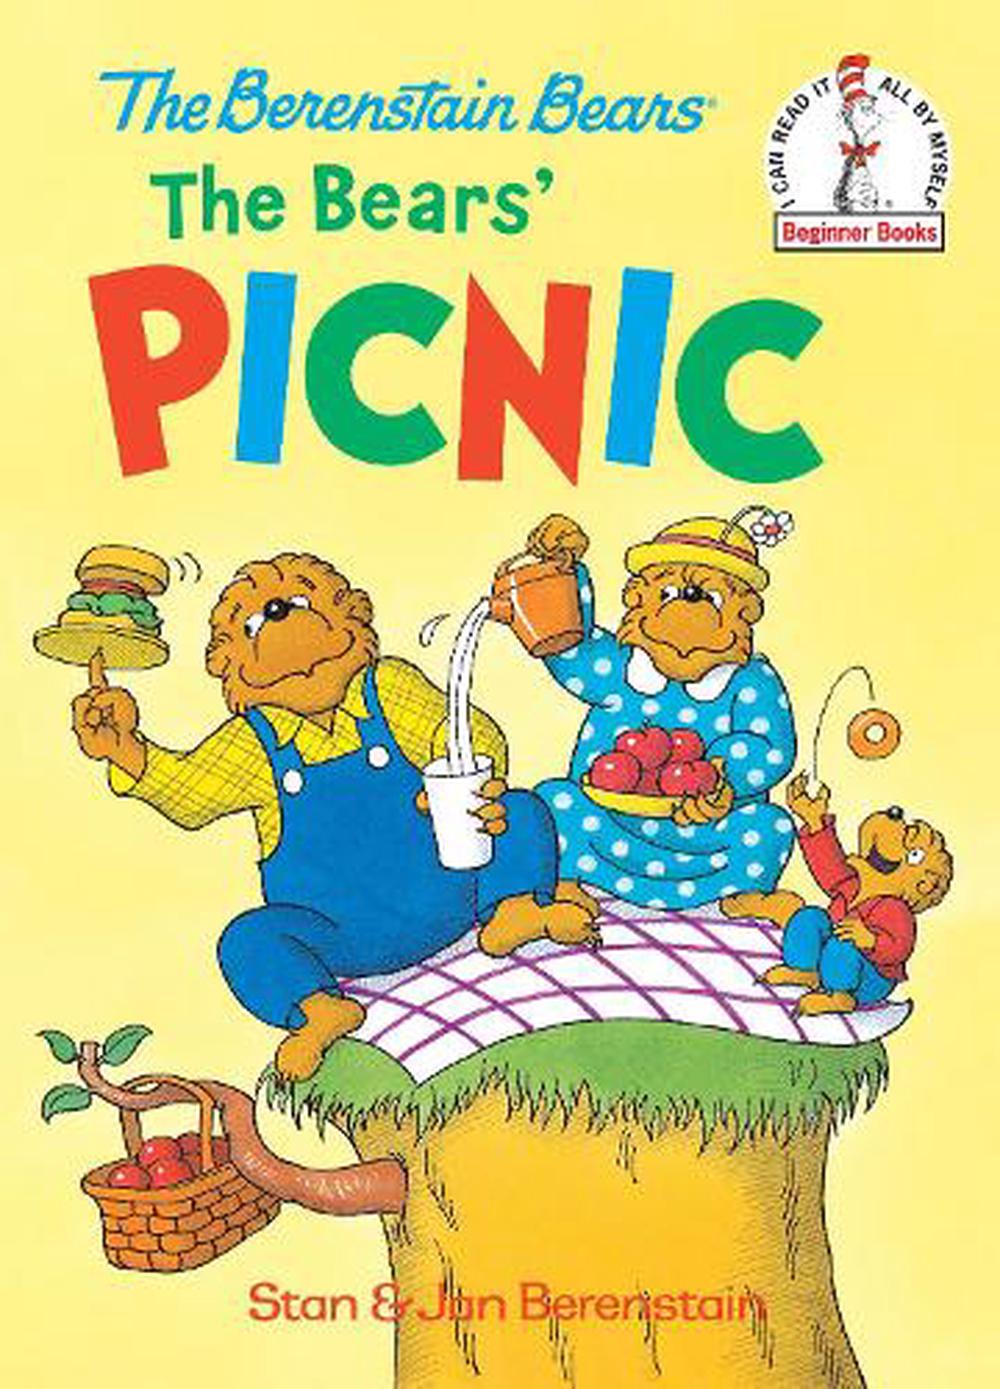 The Bears' Picnic by Stan Berenstain, Hardcover, 9780394800417 Buy